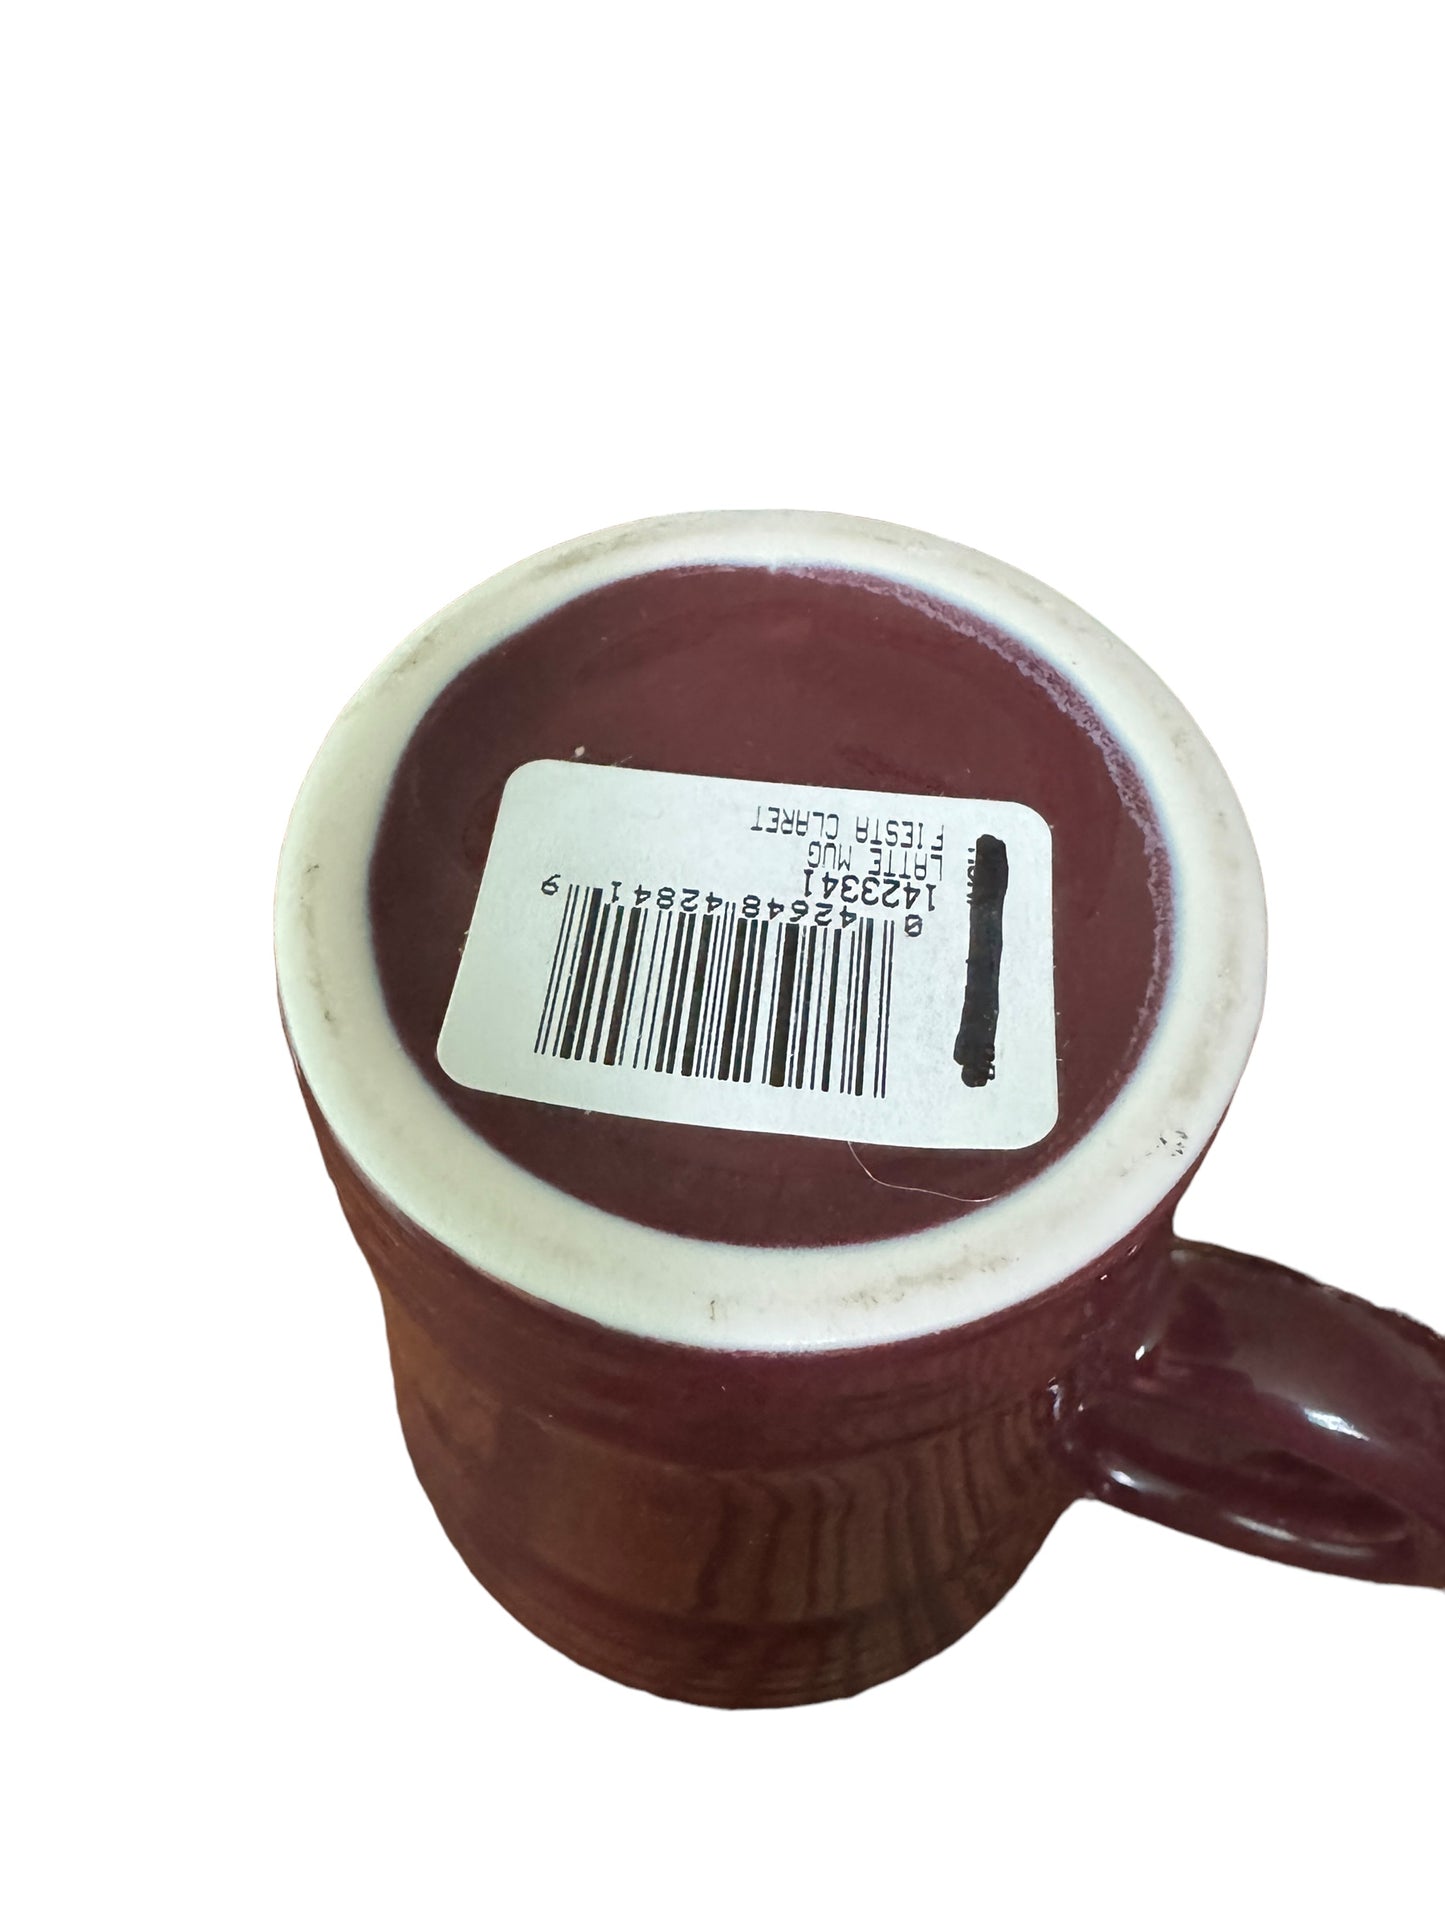 Fiesta Latte Mug in Claret (Kohls Exclusive)1st New With Tags